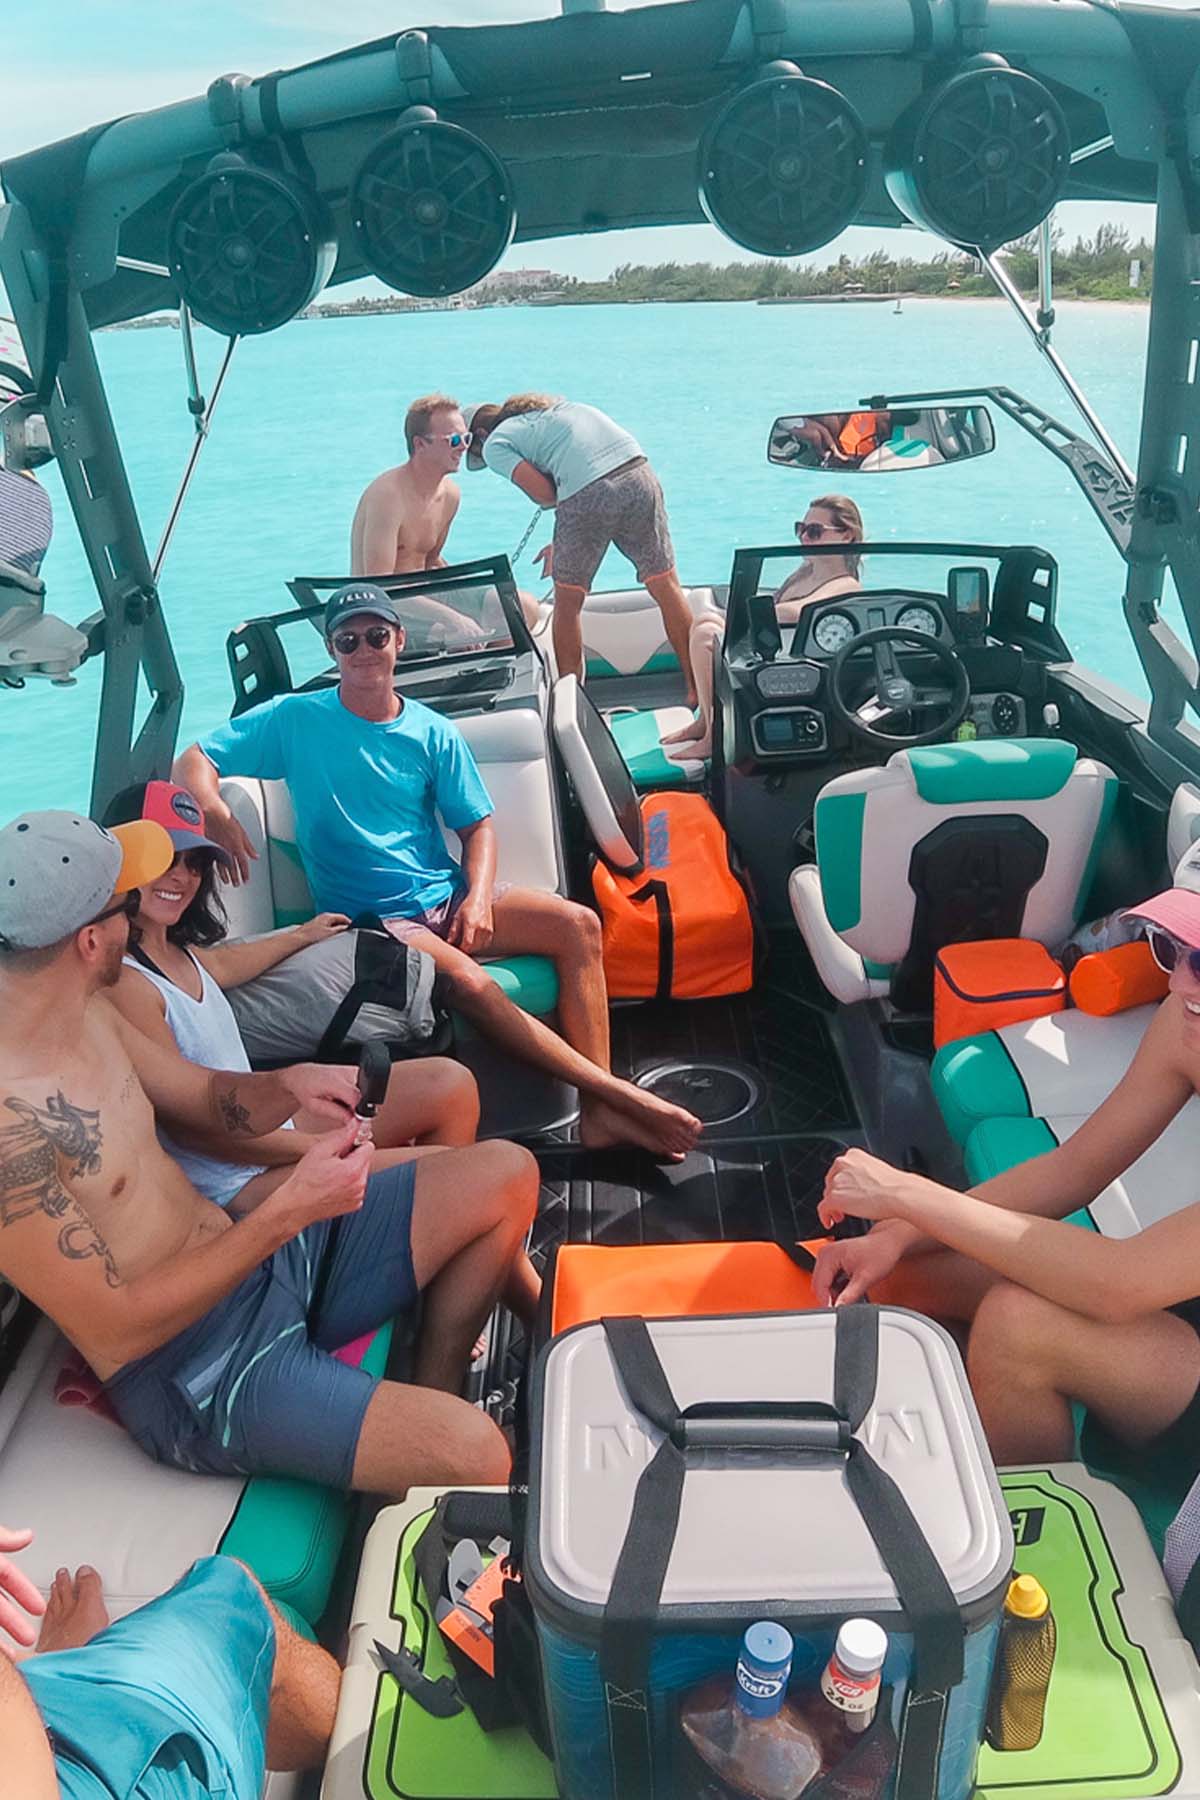 Blog Post: A Productive Rant About Boating Etiquette